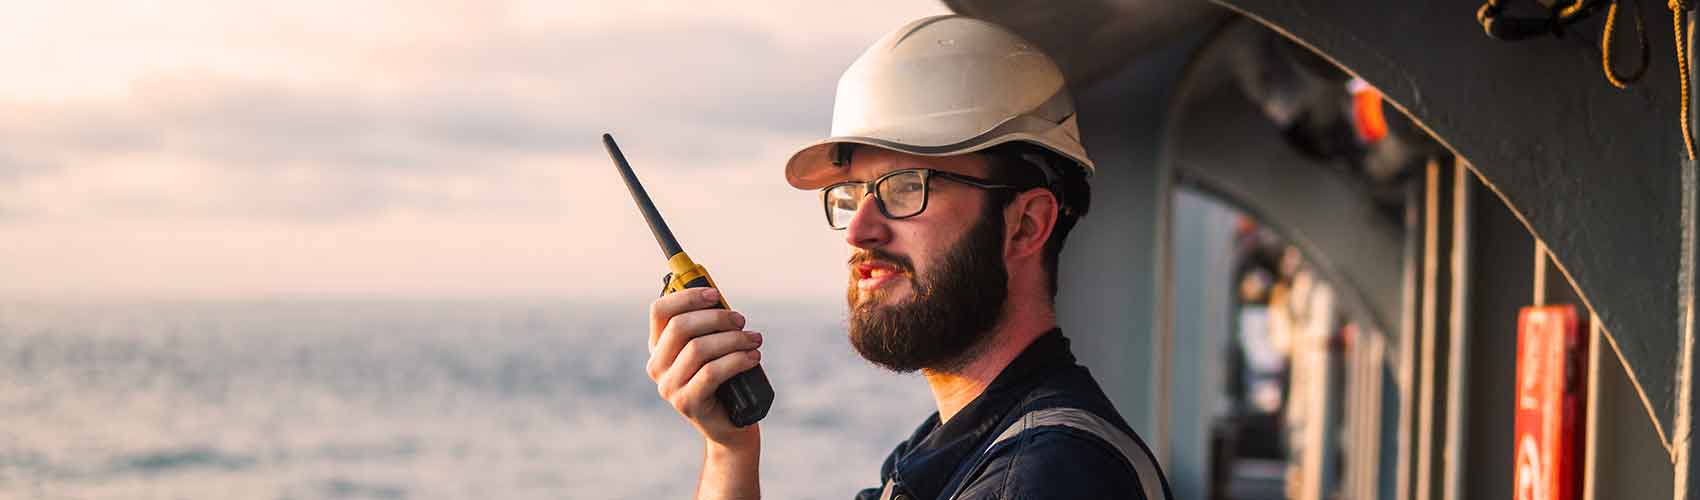 Commercial sailor on the deck of a ship withr radio